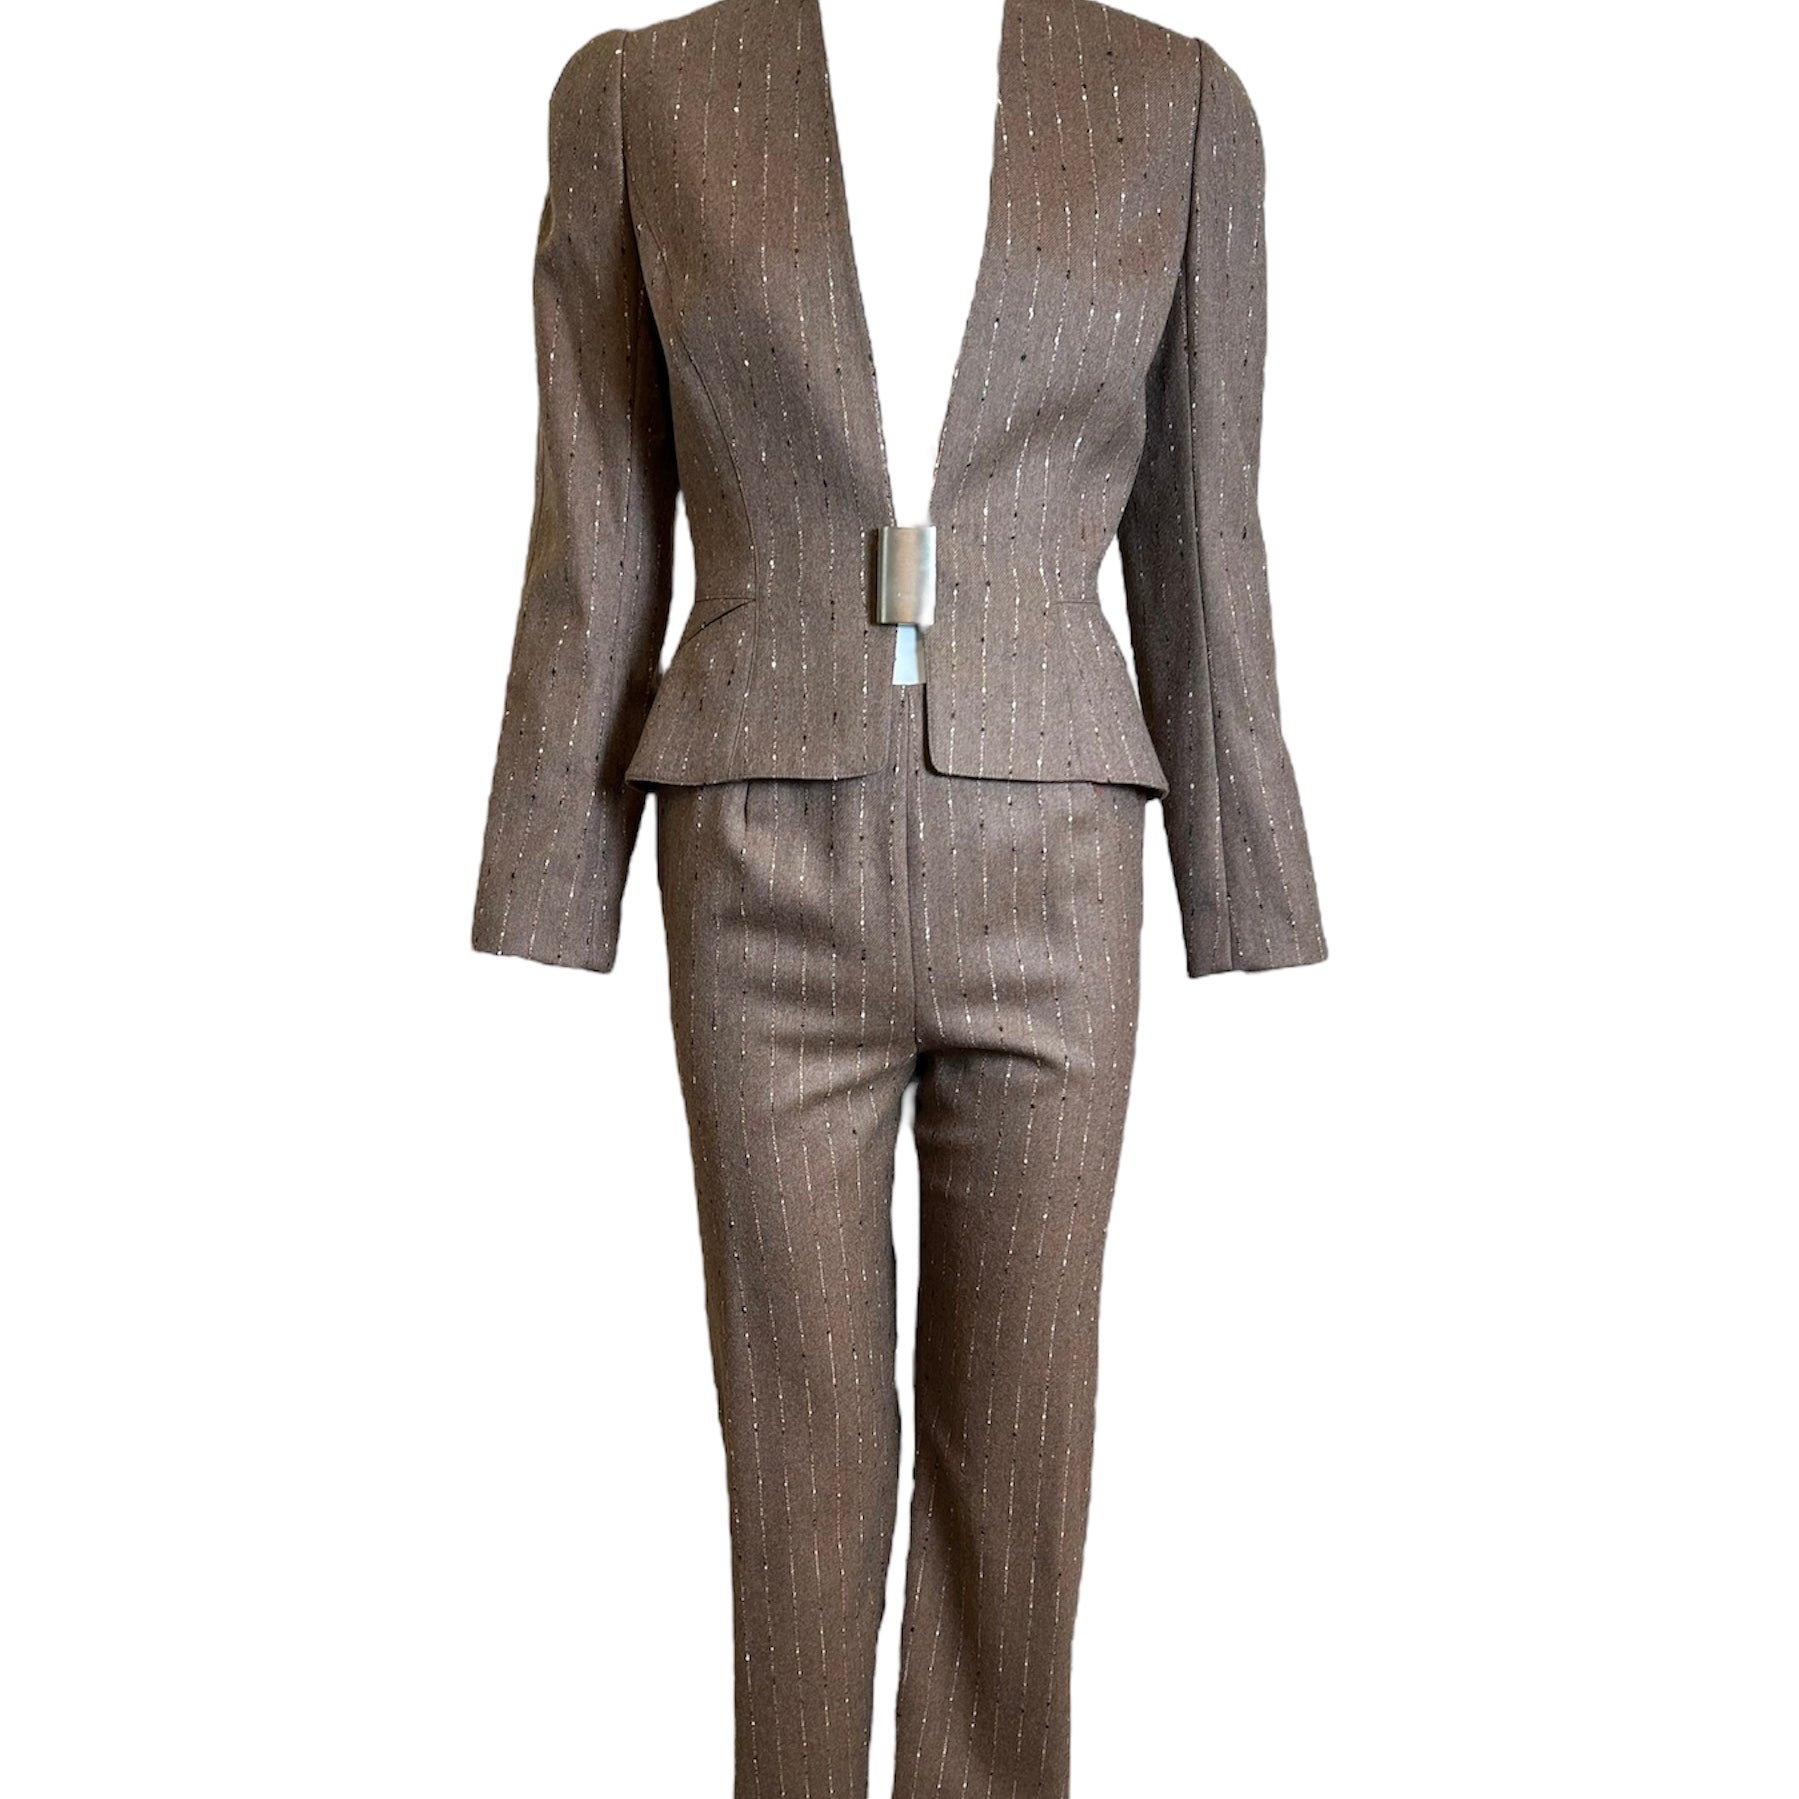 ugler Taupe Pinstripe Suit Ensemble FRONT PHOTO 1 OF 6